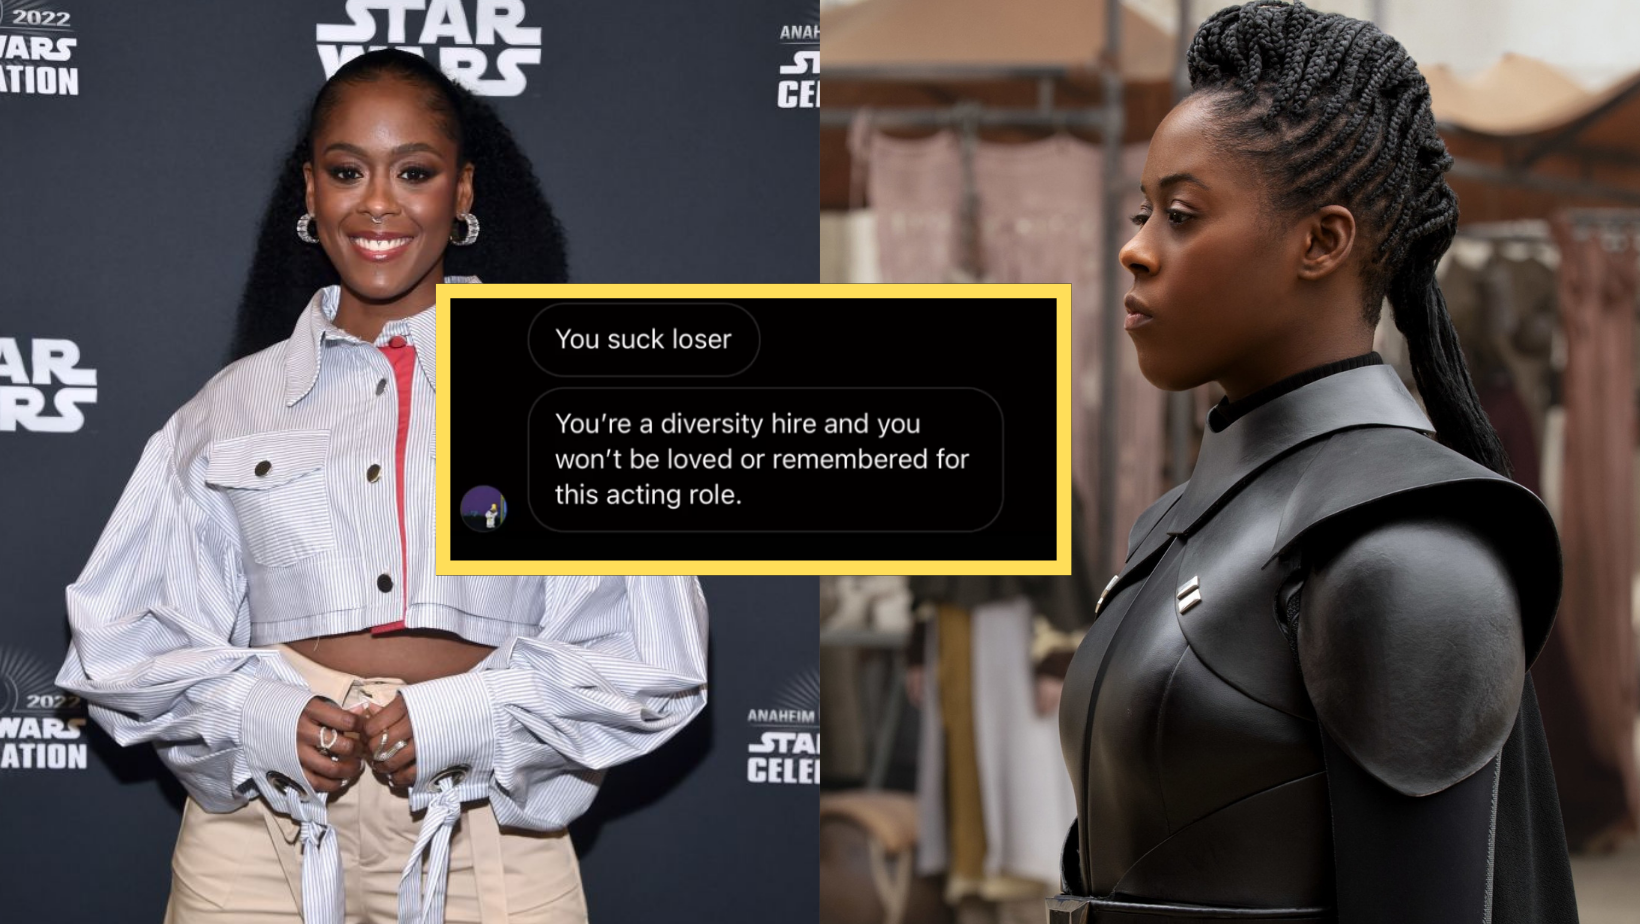 Star Wars' Defends Moses Ingram From Racist Online Comments - Okayplayer